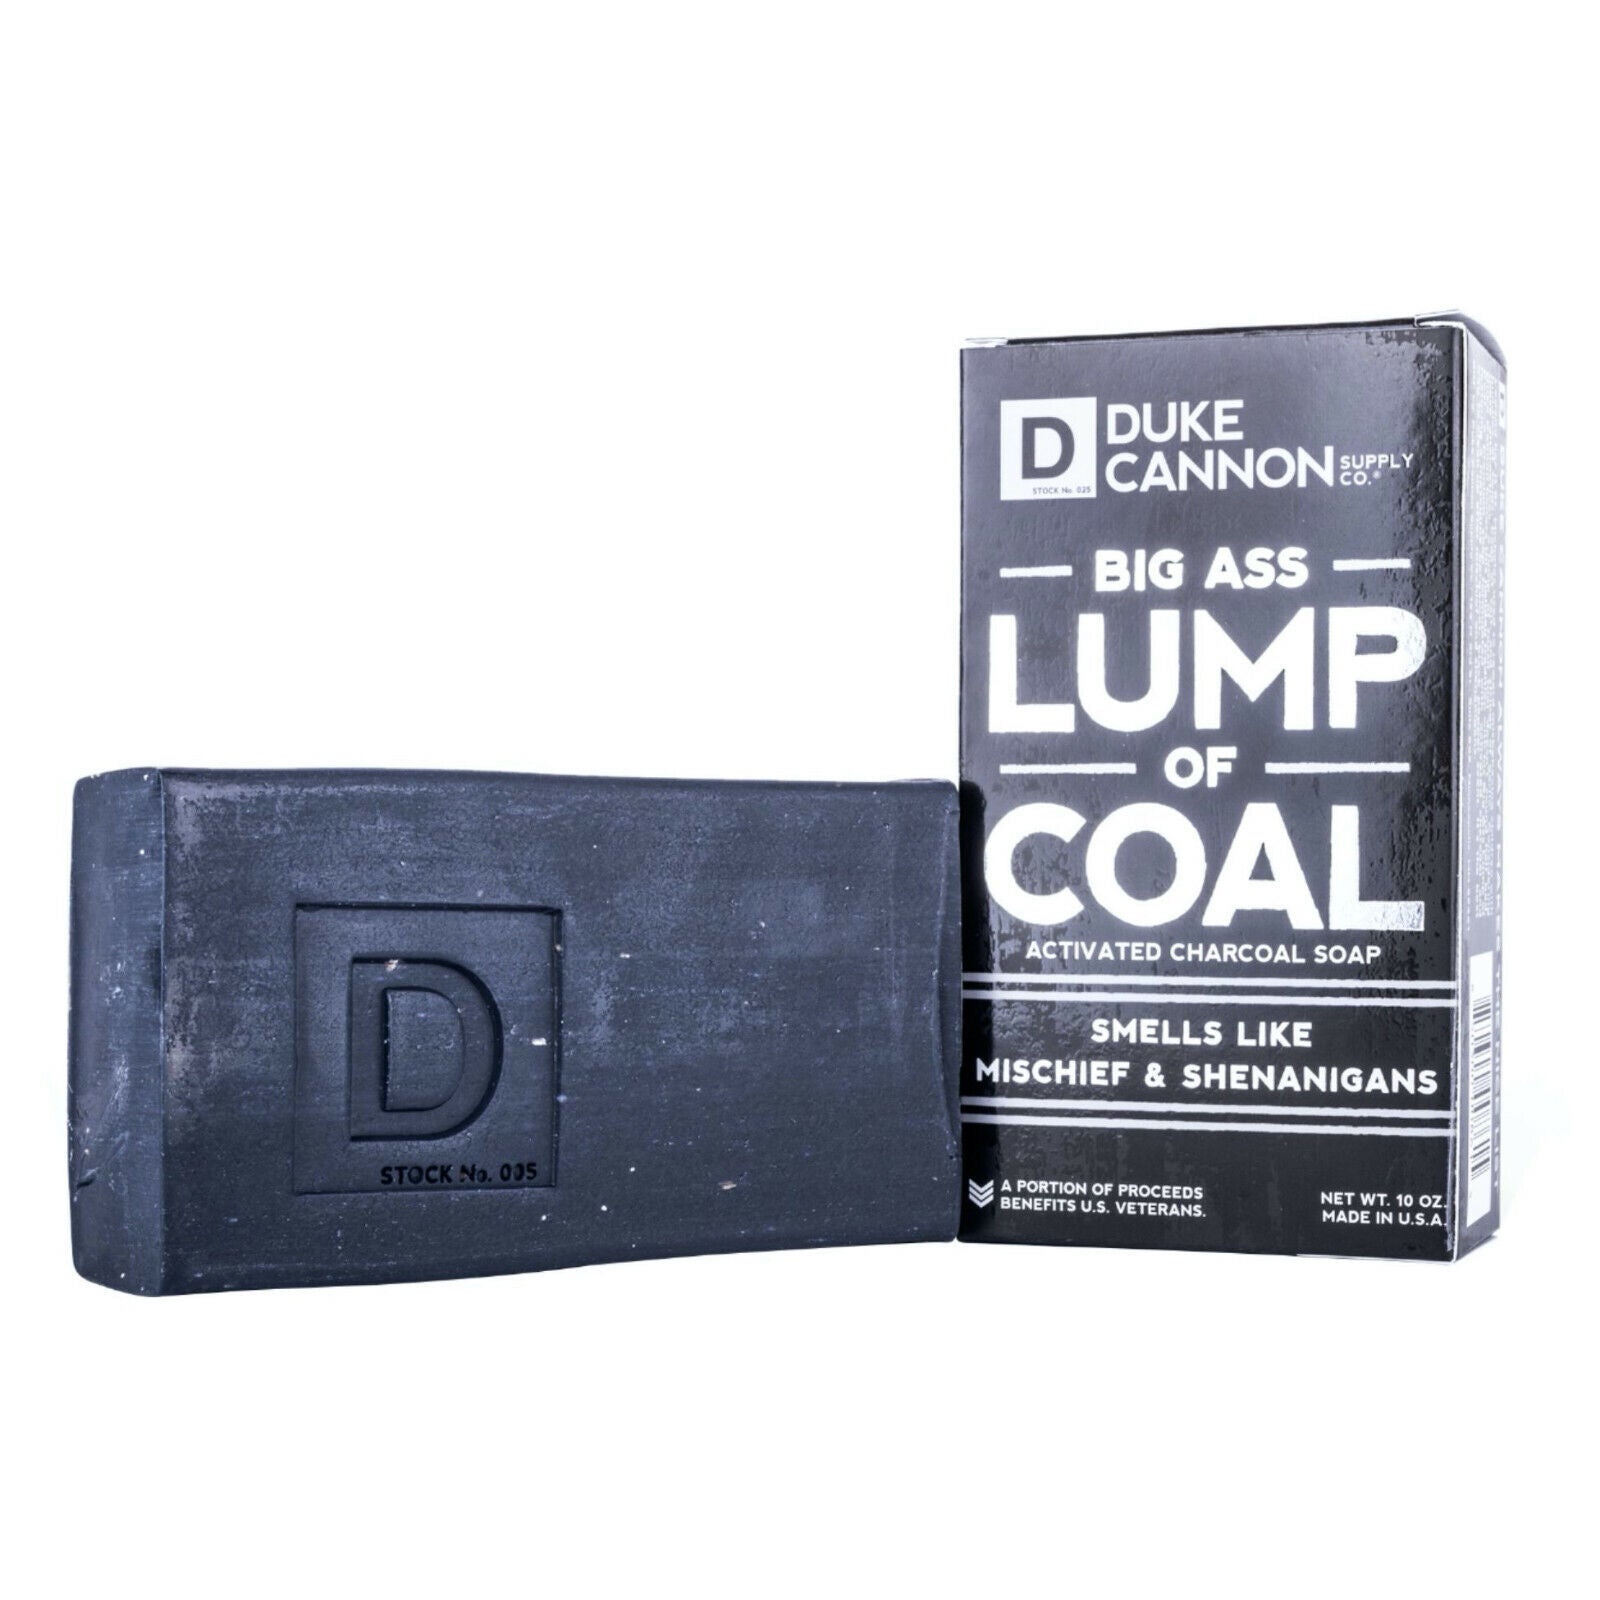 Duke Cannon Big Ass Brick of Soap Lump of Activated Charcoal Soap